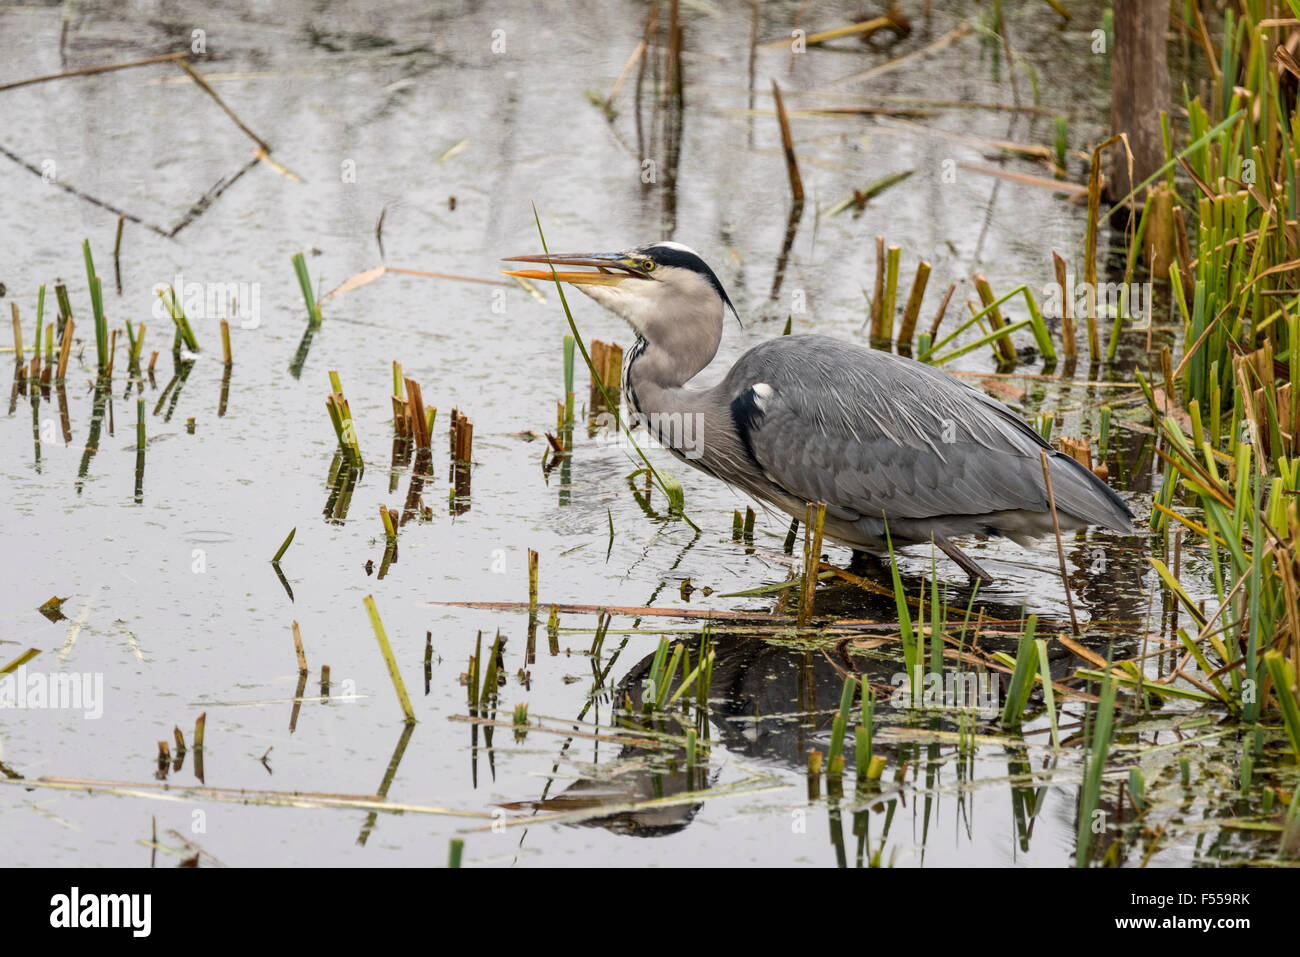 A Grey Heron swallowing a fish (tail just visible in the bill) Stock Photo